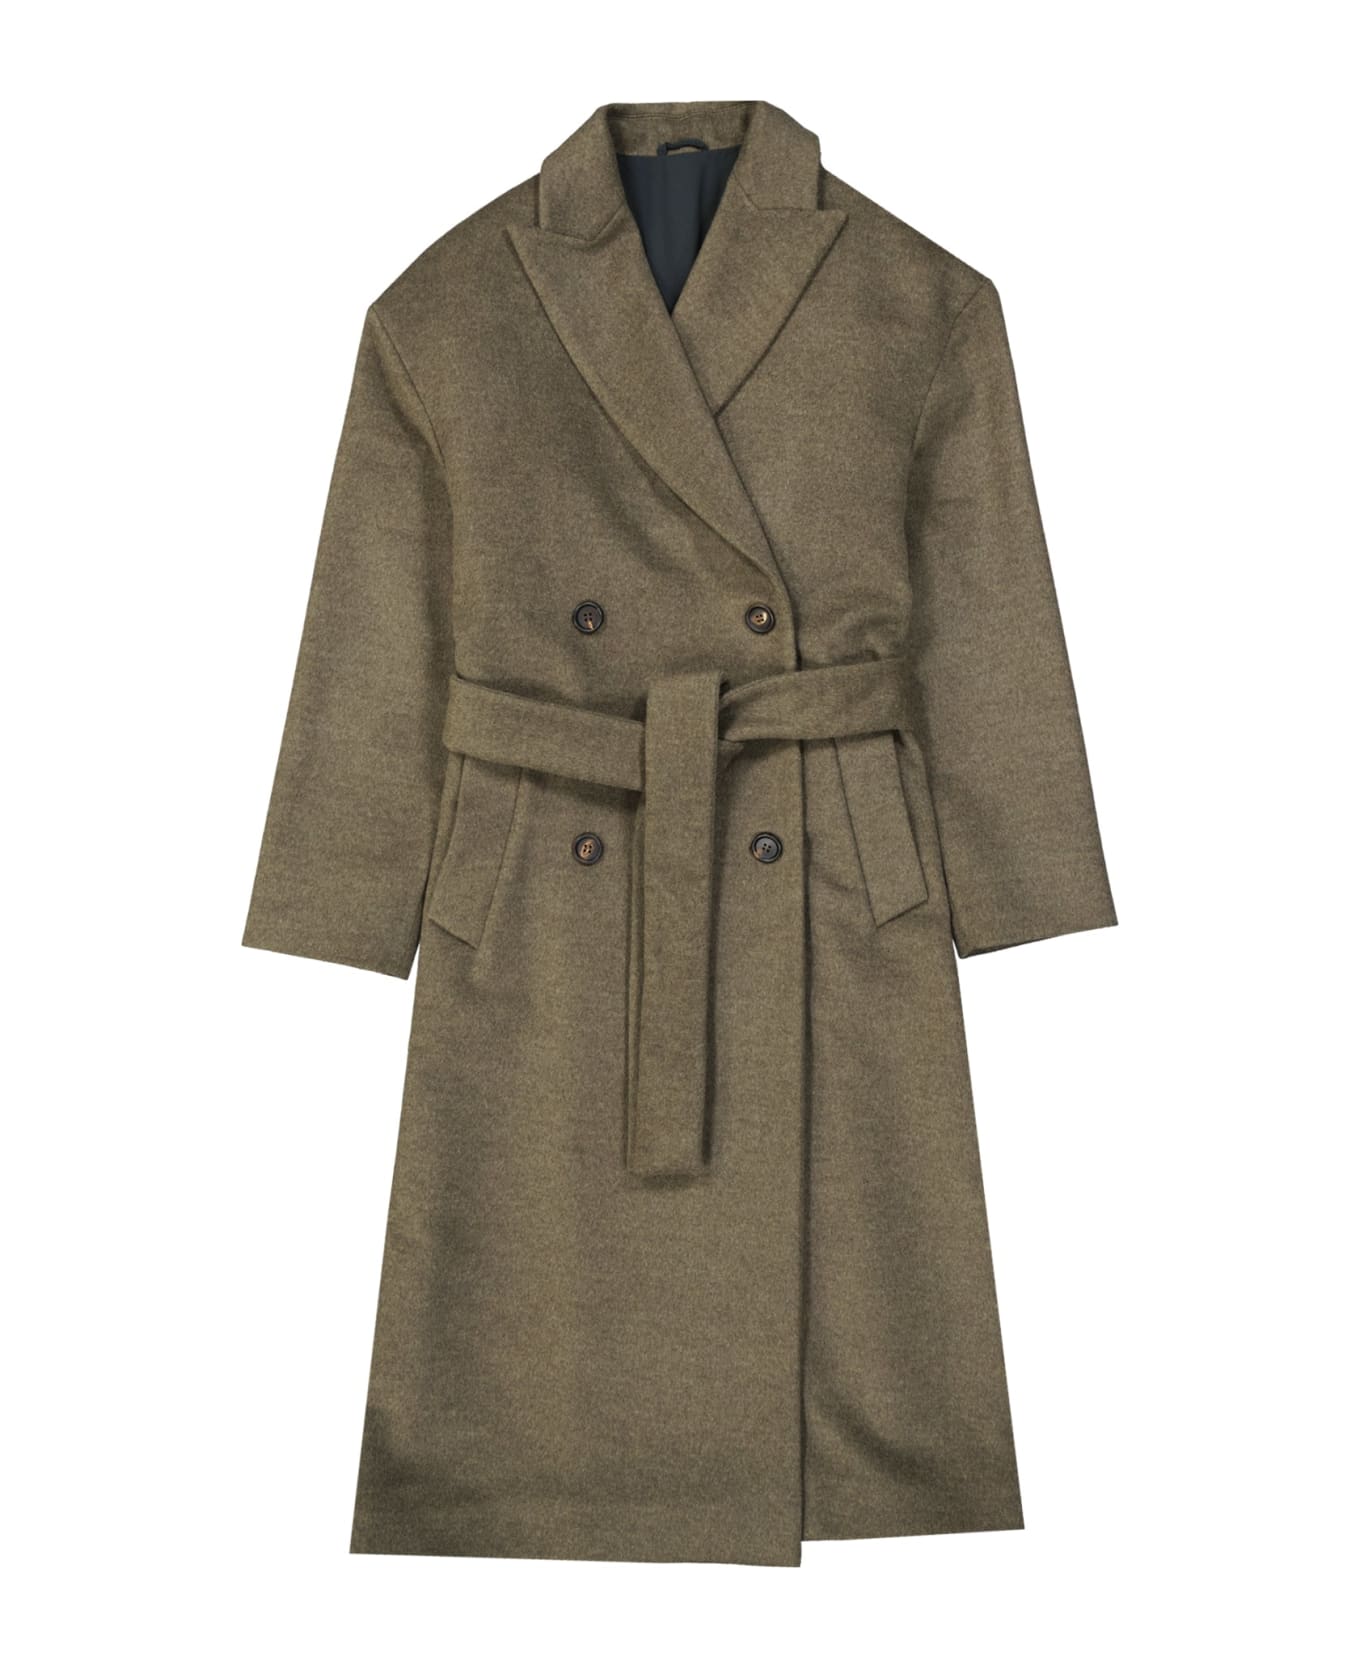 Brunello Cucinelli Wool And Cashmere Coat - Green